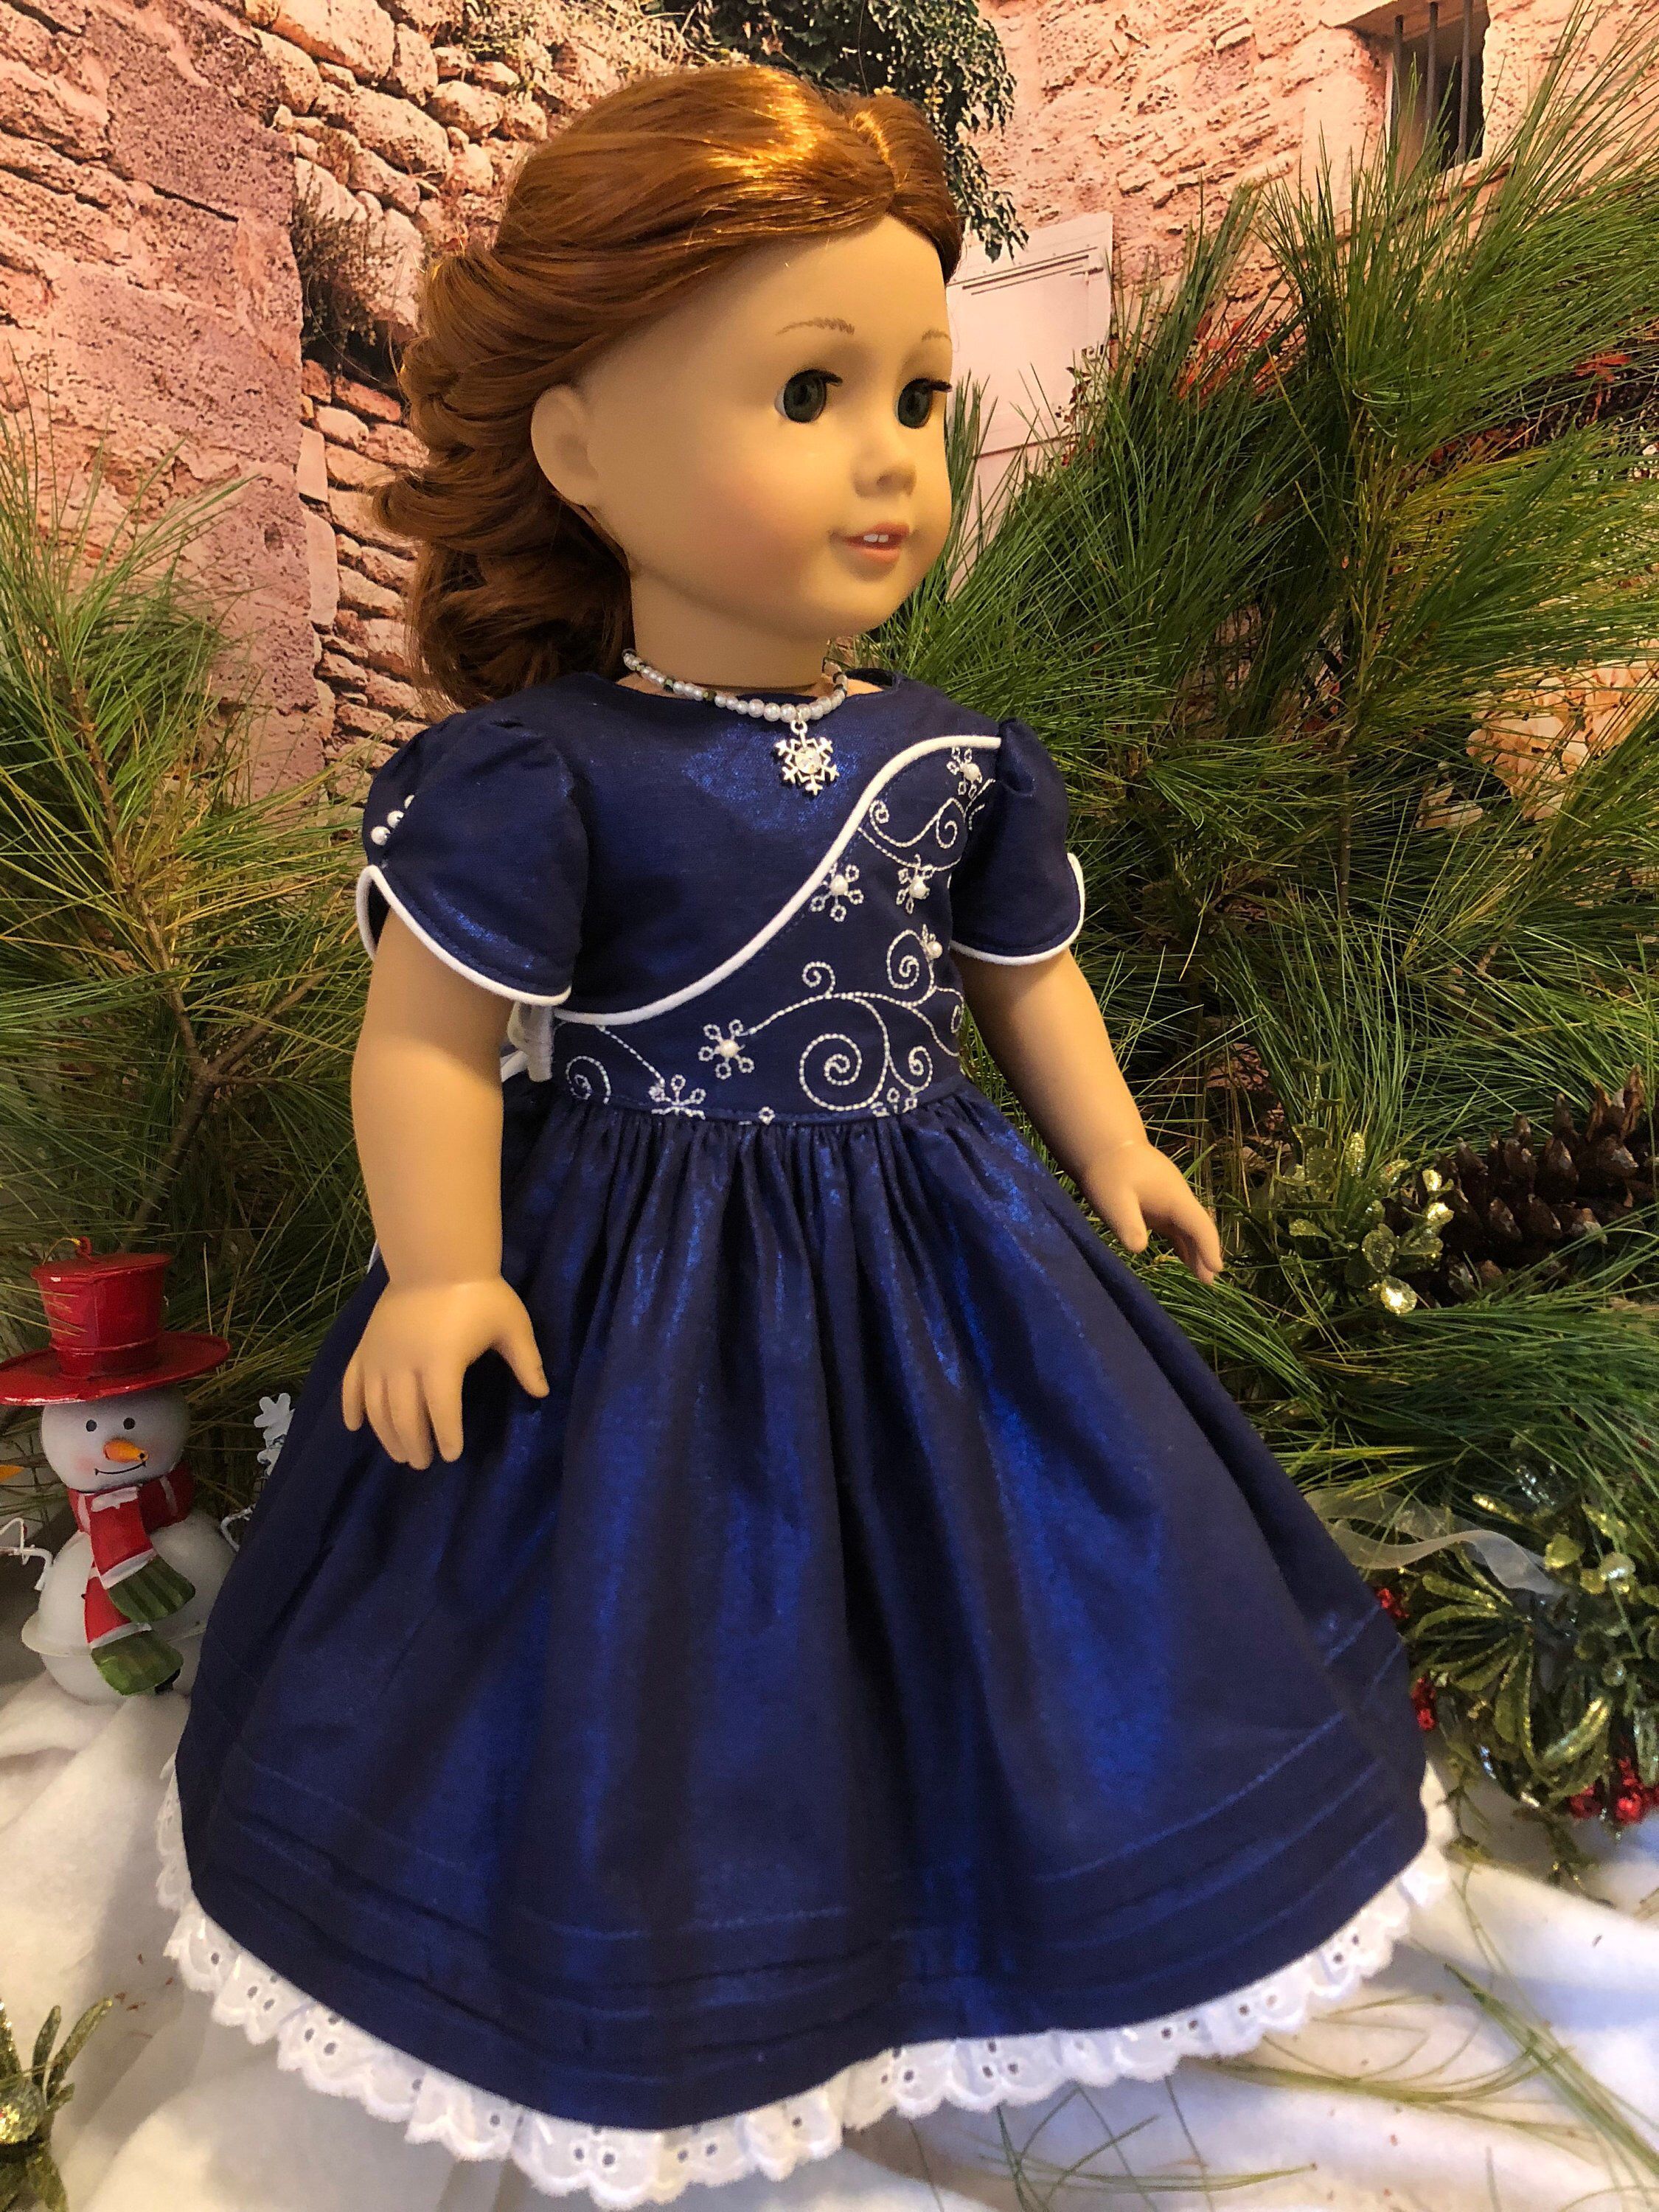 Saphire Blue Christmas party dress / fits American Girl type dolls -   25 diy dress party
 ideas